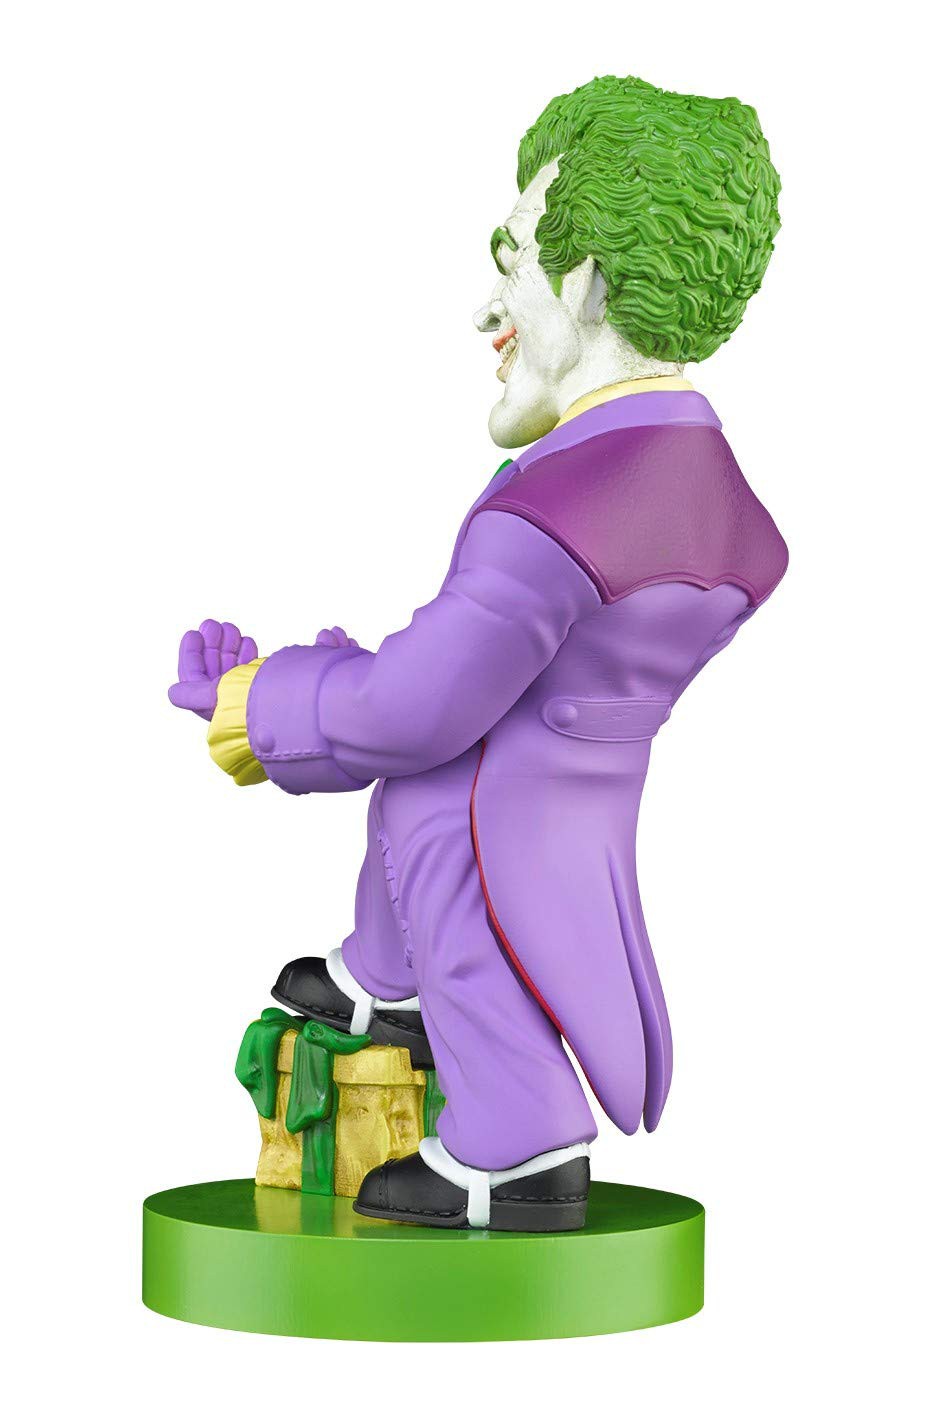 The Joker Cable Guy stand